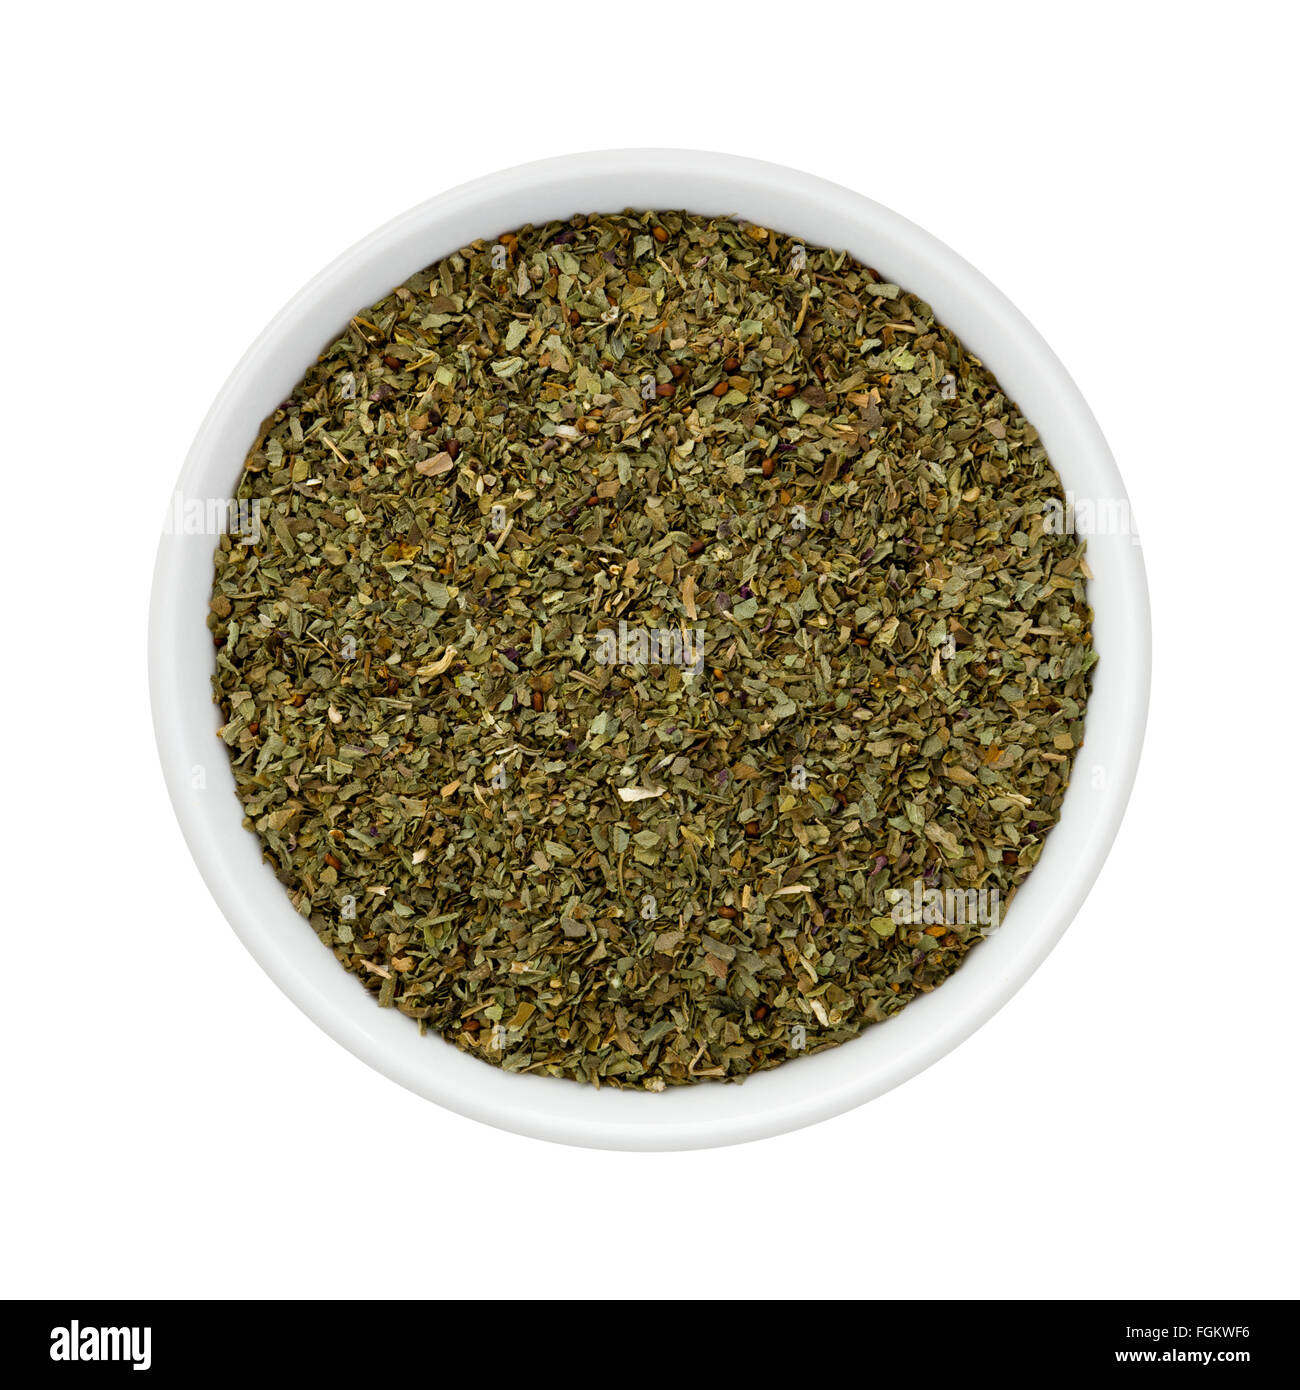 Dried Basil Flakes in a Ceramic Bowl. The image is a cut out, isolated on a white background. Stock Photo